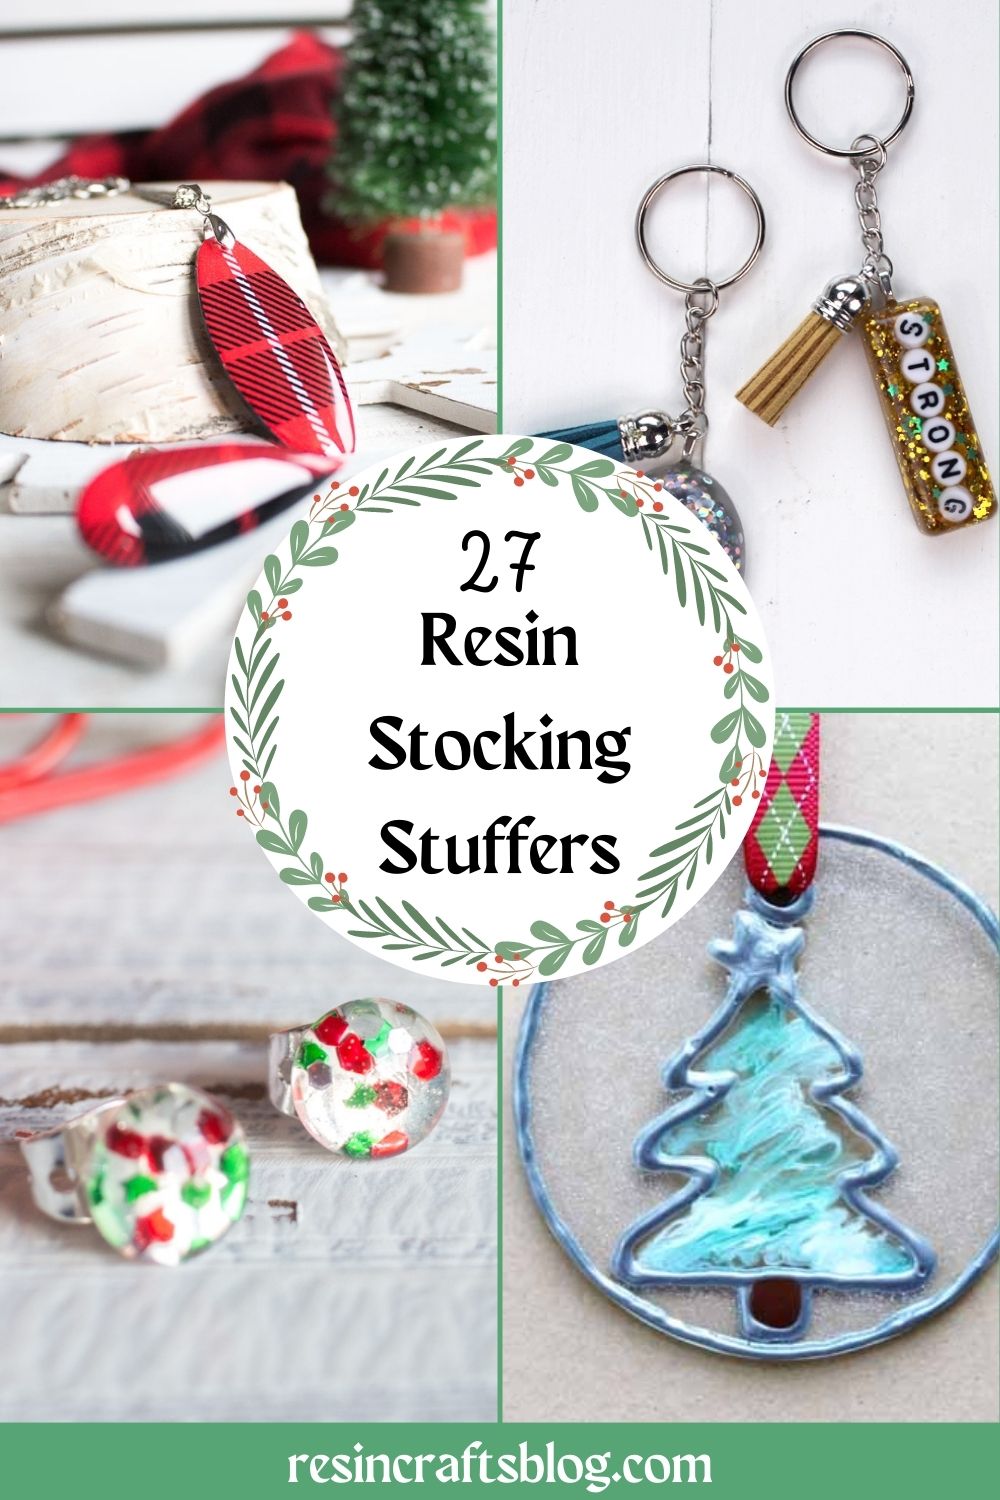 In a hurry to find the perfect stocking stuffers for everyone on your list?  Why not make a DIY resin project for them this year! #resincraftsblog #diyresinstockingstuffers #diystockingstufferswithresin via @resincraftsblog